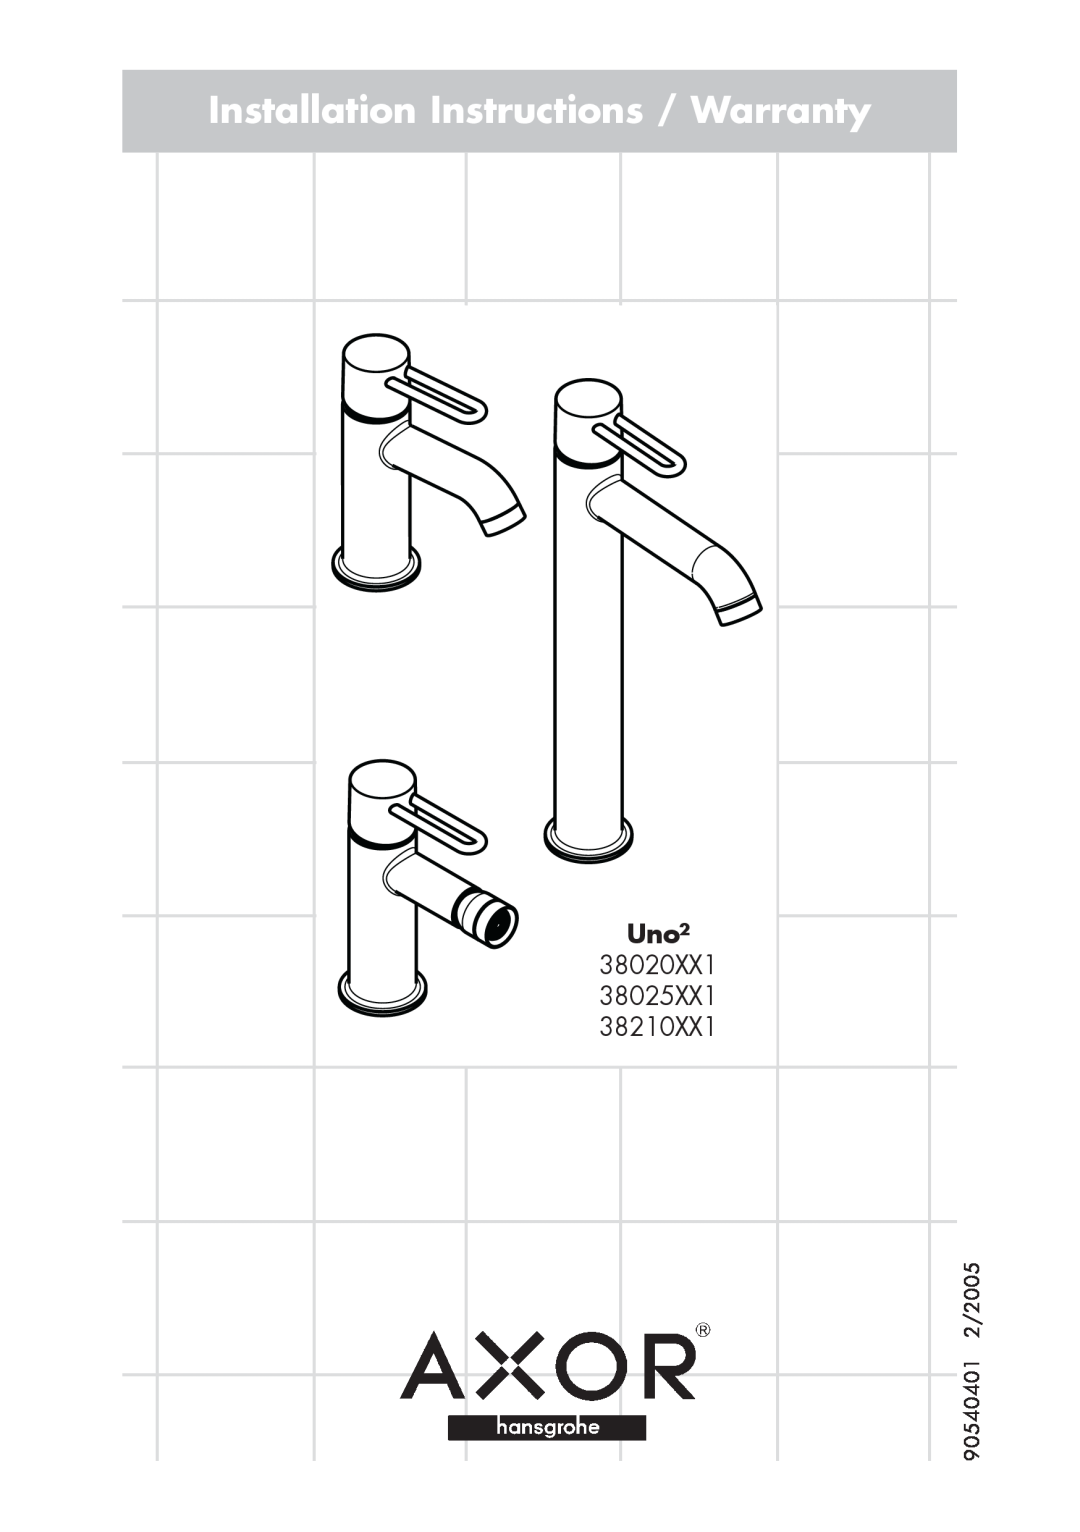 Hans Grohe 38020XX1 installation instructions Uno², Installation Instructions / Warranty, 38025XX1, 38210XX1 